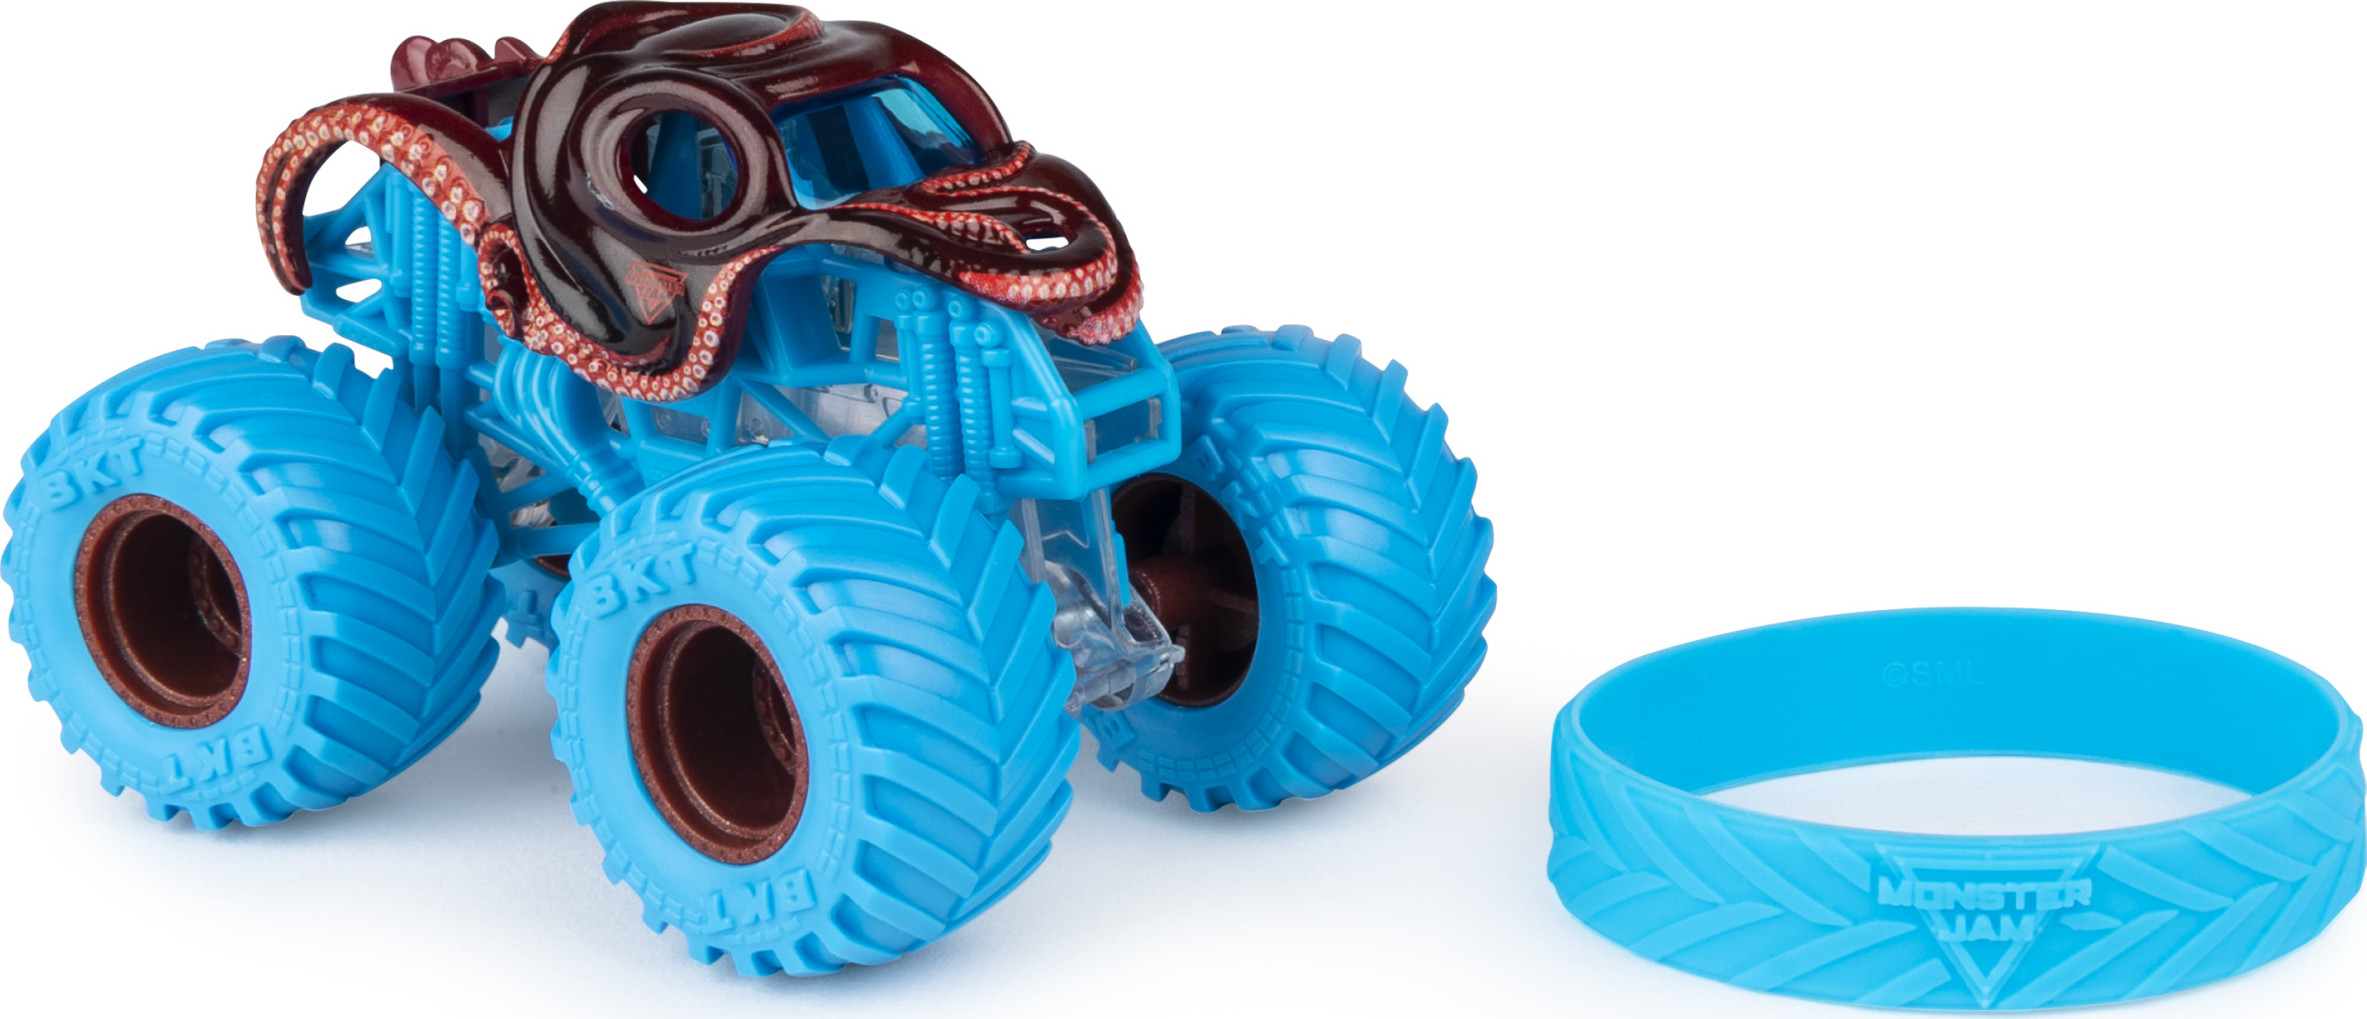 Monster Jam, Official 1:64 Scale Die-Cast Monster Truck (Styles May Vary) - image 5 of 7